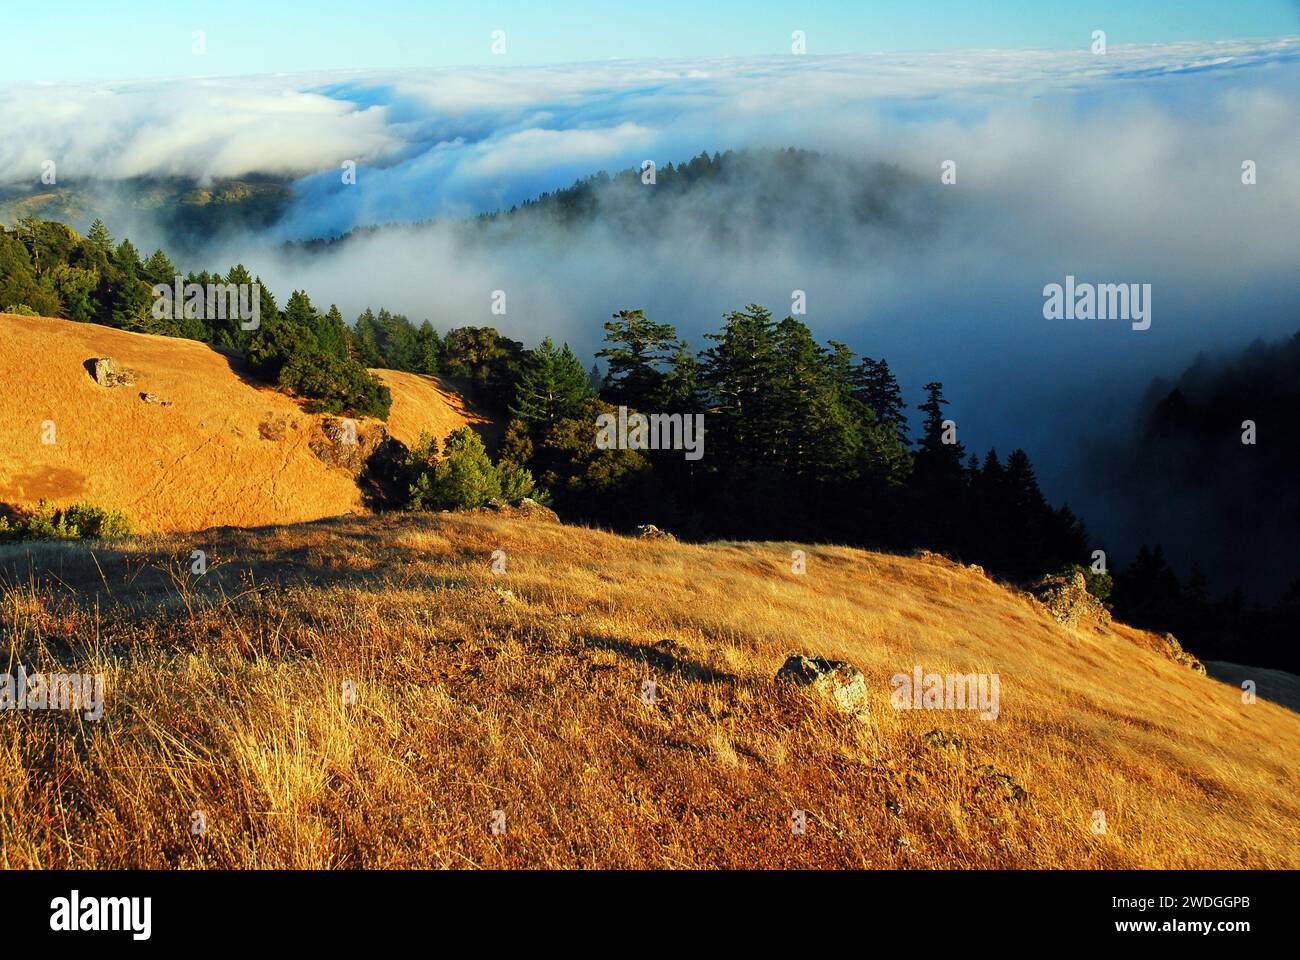 Fog rolls in and settles in between the hills and valley of Mt Tamalpais in Marin County, near San Francisco. Stock Photo